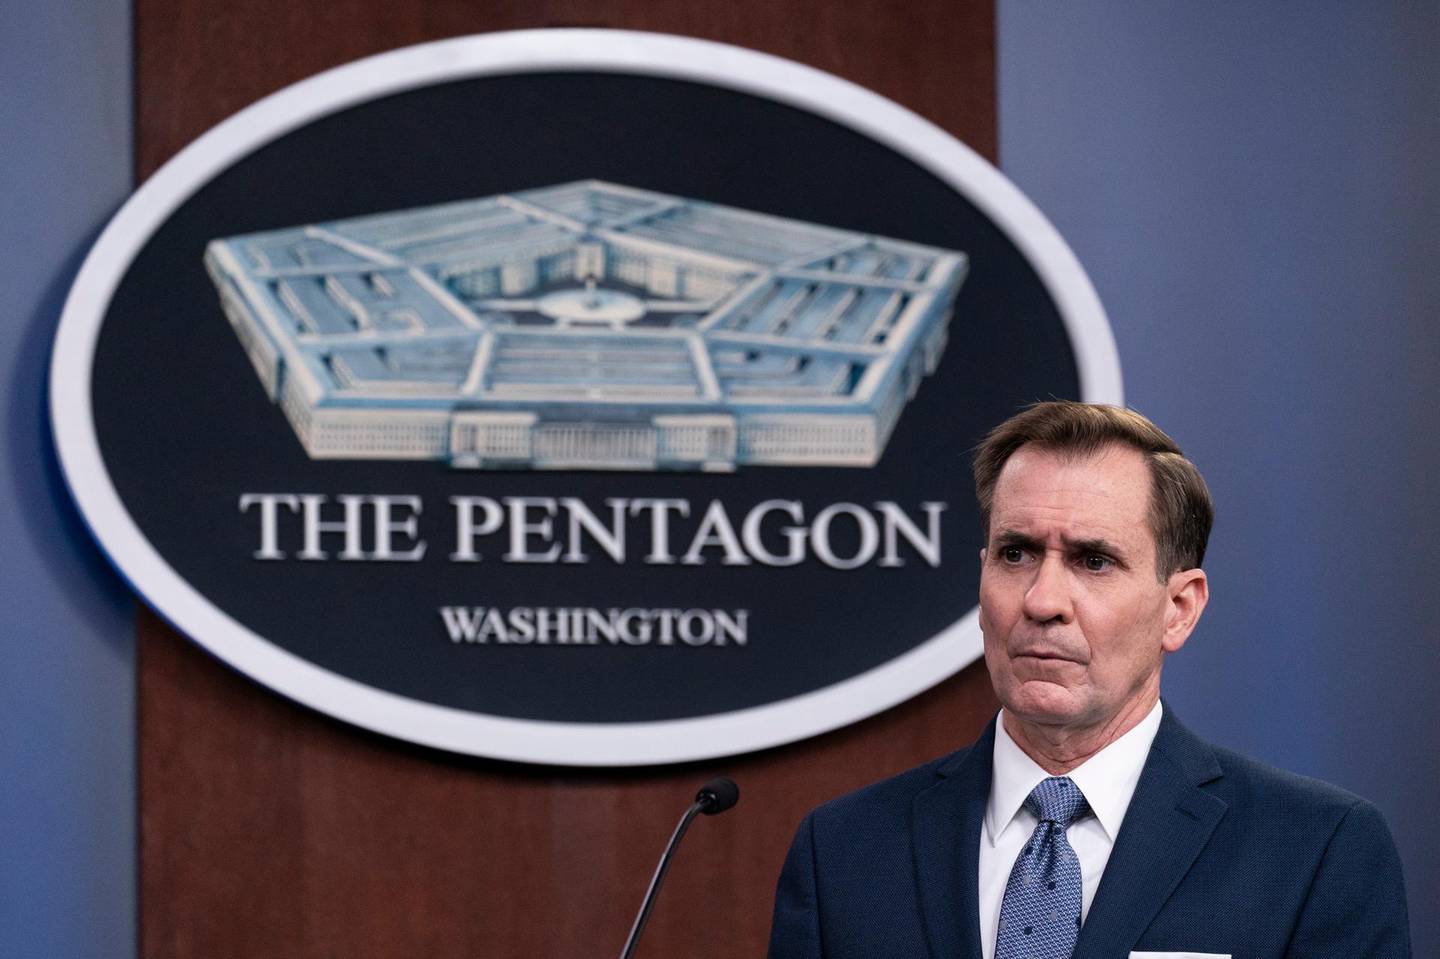 FILE - In this Wednesday, Feb. 17, 2021, file photo, Pentagon spokesman John Kirby speaks during a media briefing at the Pentagon, in Washington. Kirby announced late Thursday, Feb. 25, 2021, that the U.S. military conducted airstrikes against facilities in eastern Syria that the Pentagon said were used by Iran-backed militia groups, in response to recent attacks against U.S. personnel in Iraq. Kirby said the action was authorized by President Joe Biden. (AP Photo/Alex Brandon, File)